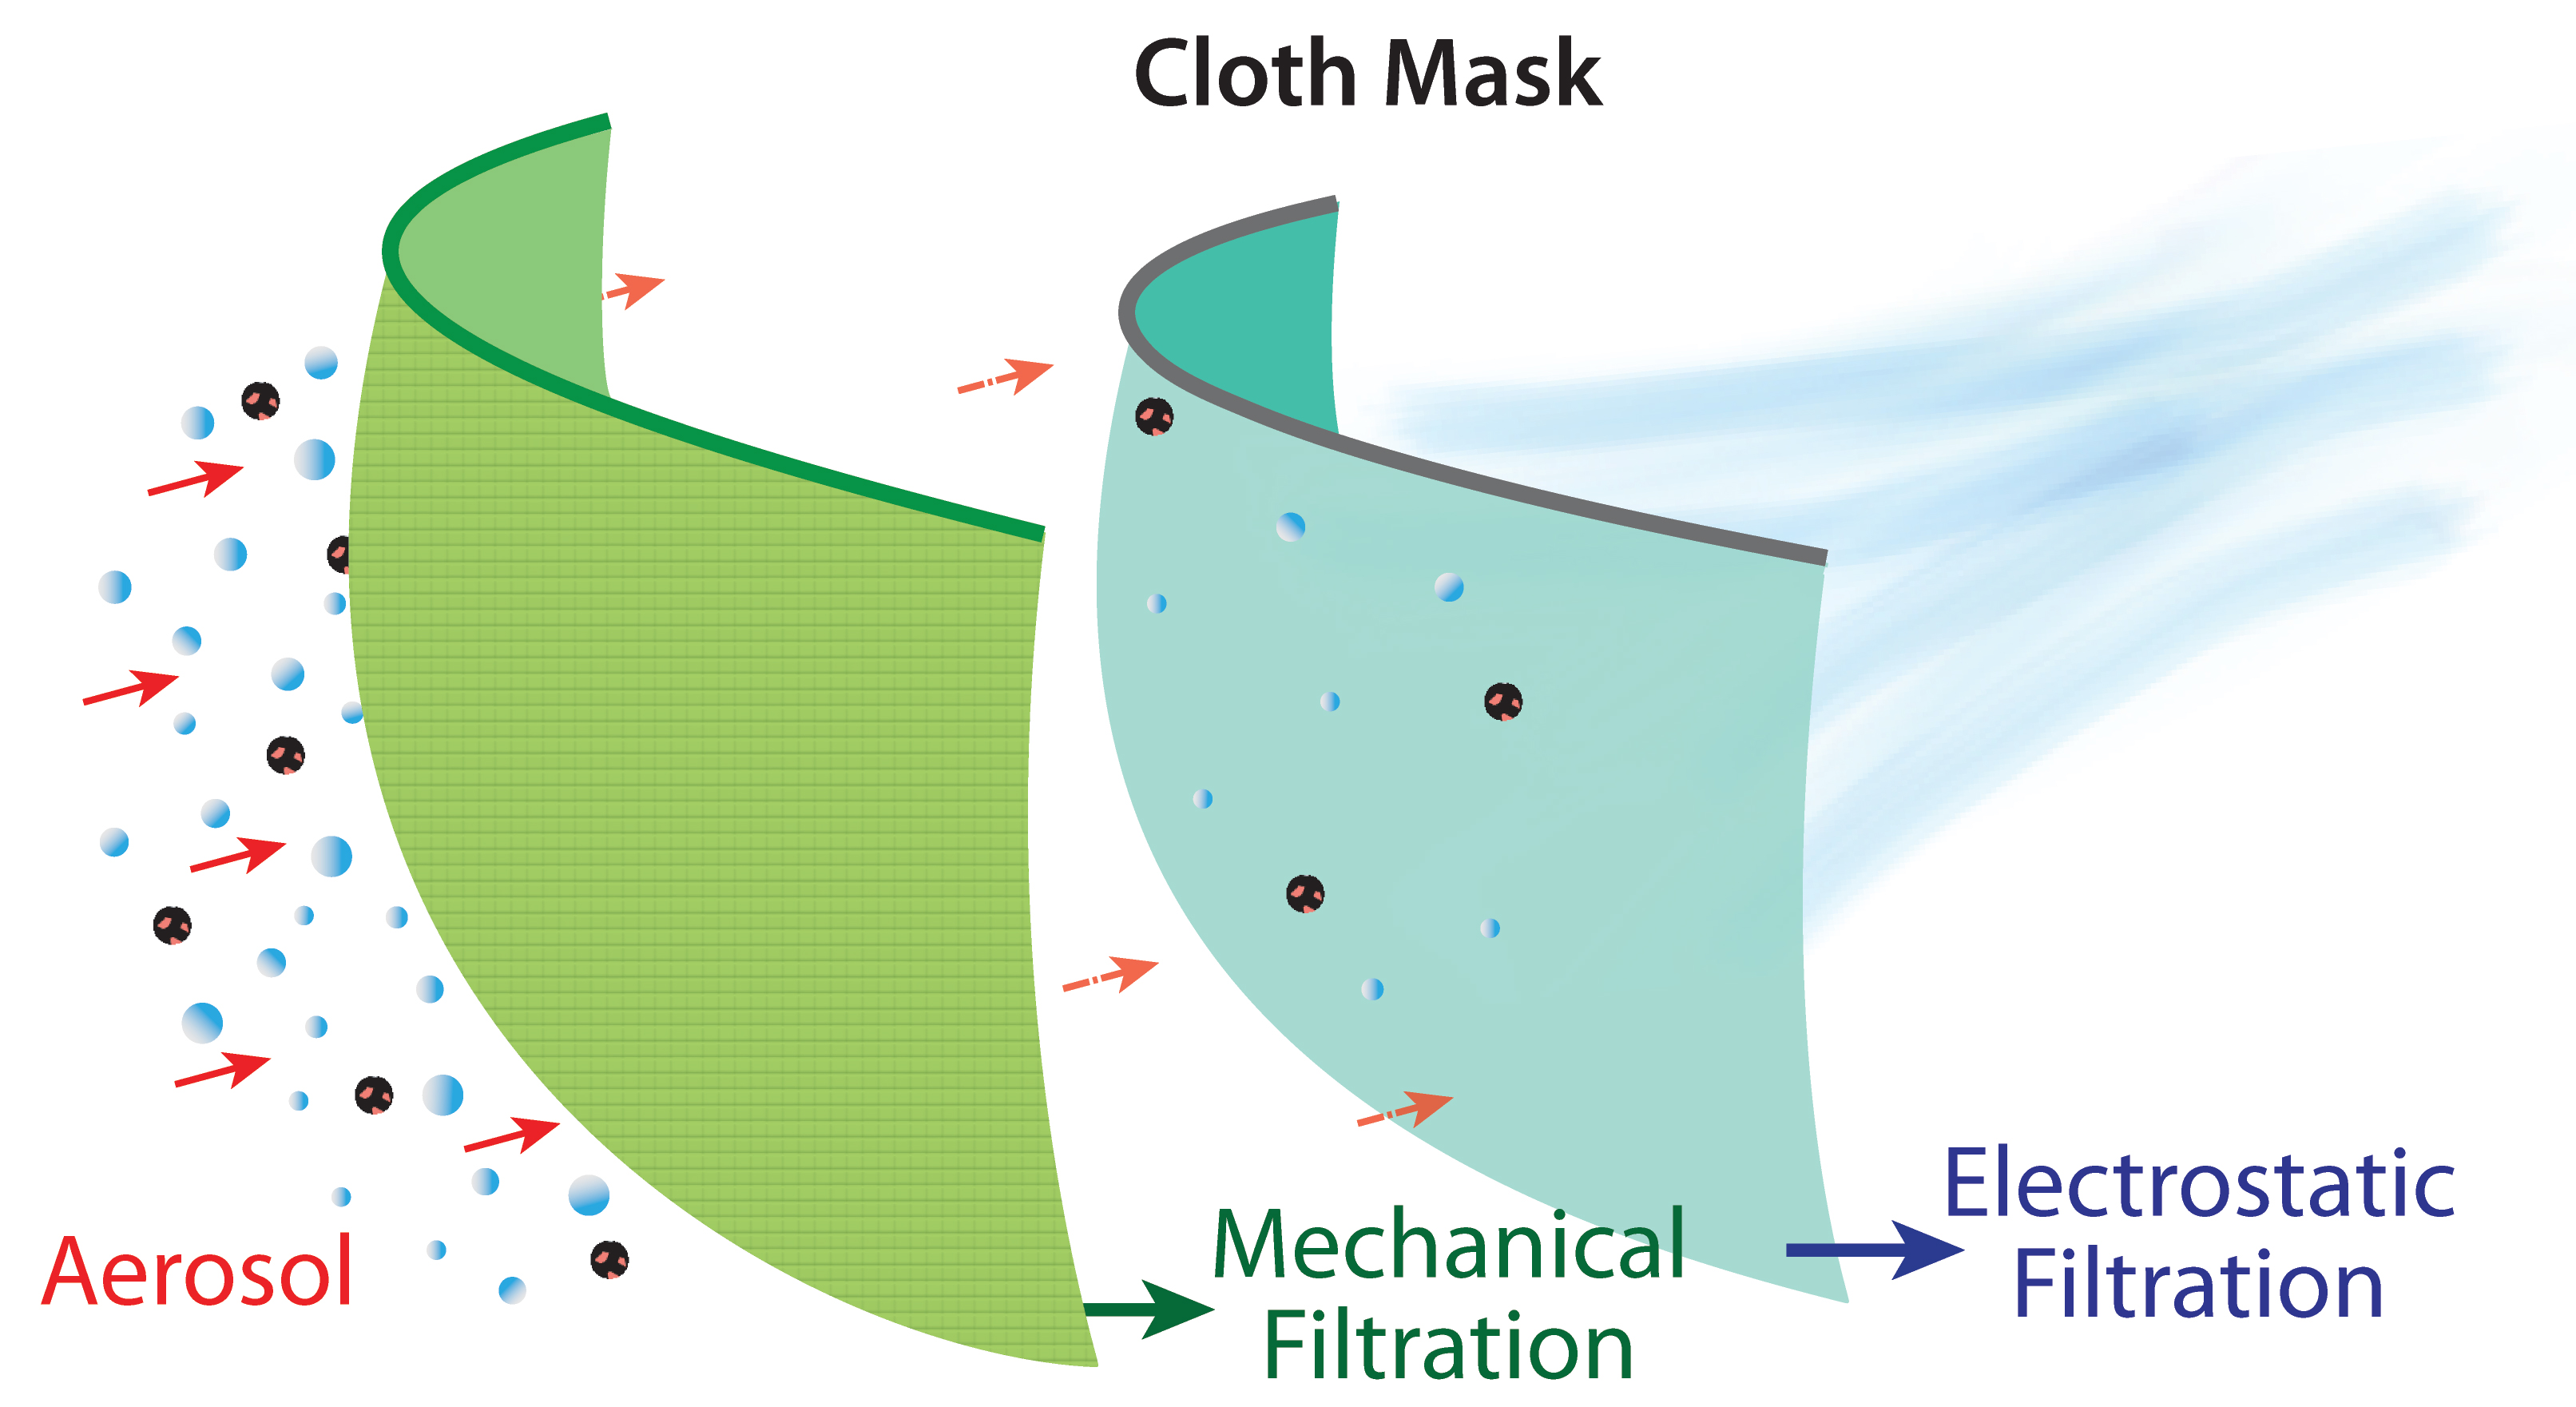 Cloth mask diagram of two layers and a flow of particles through the mask layers.